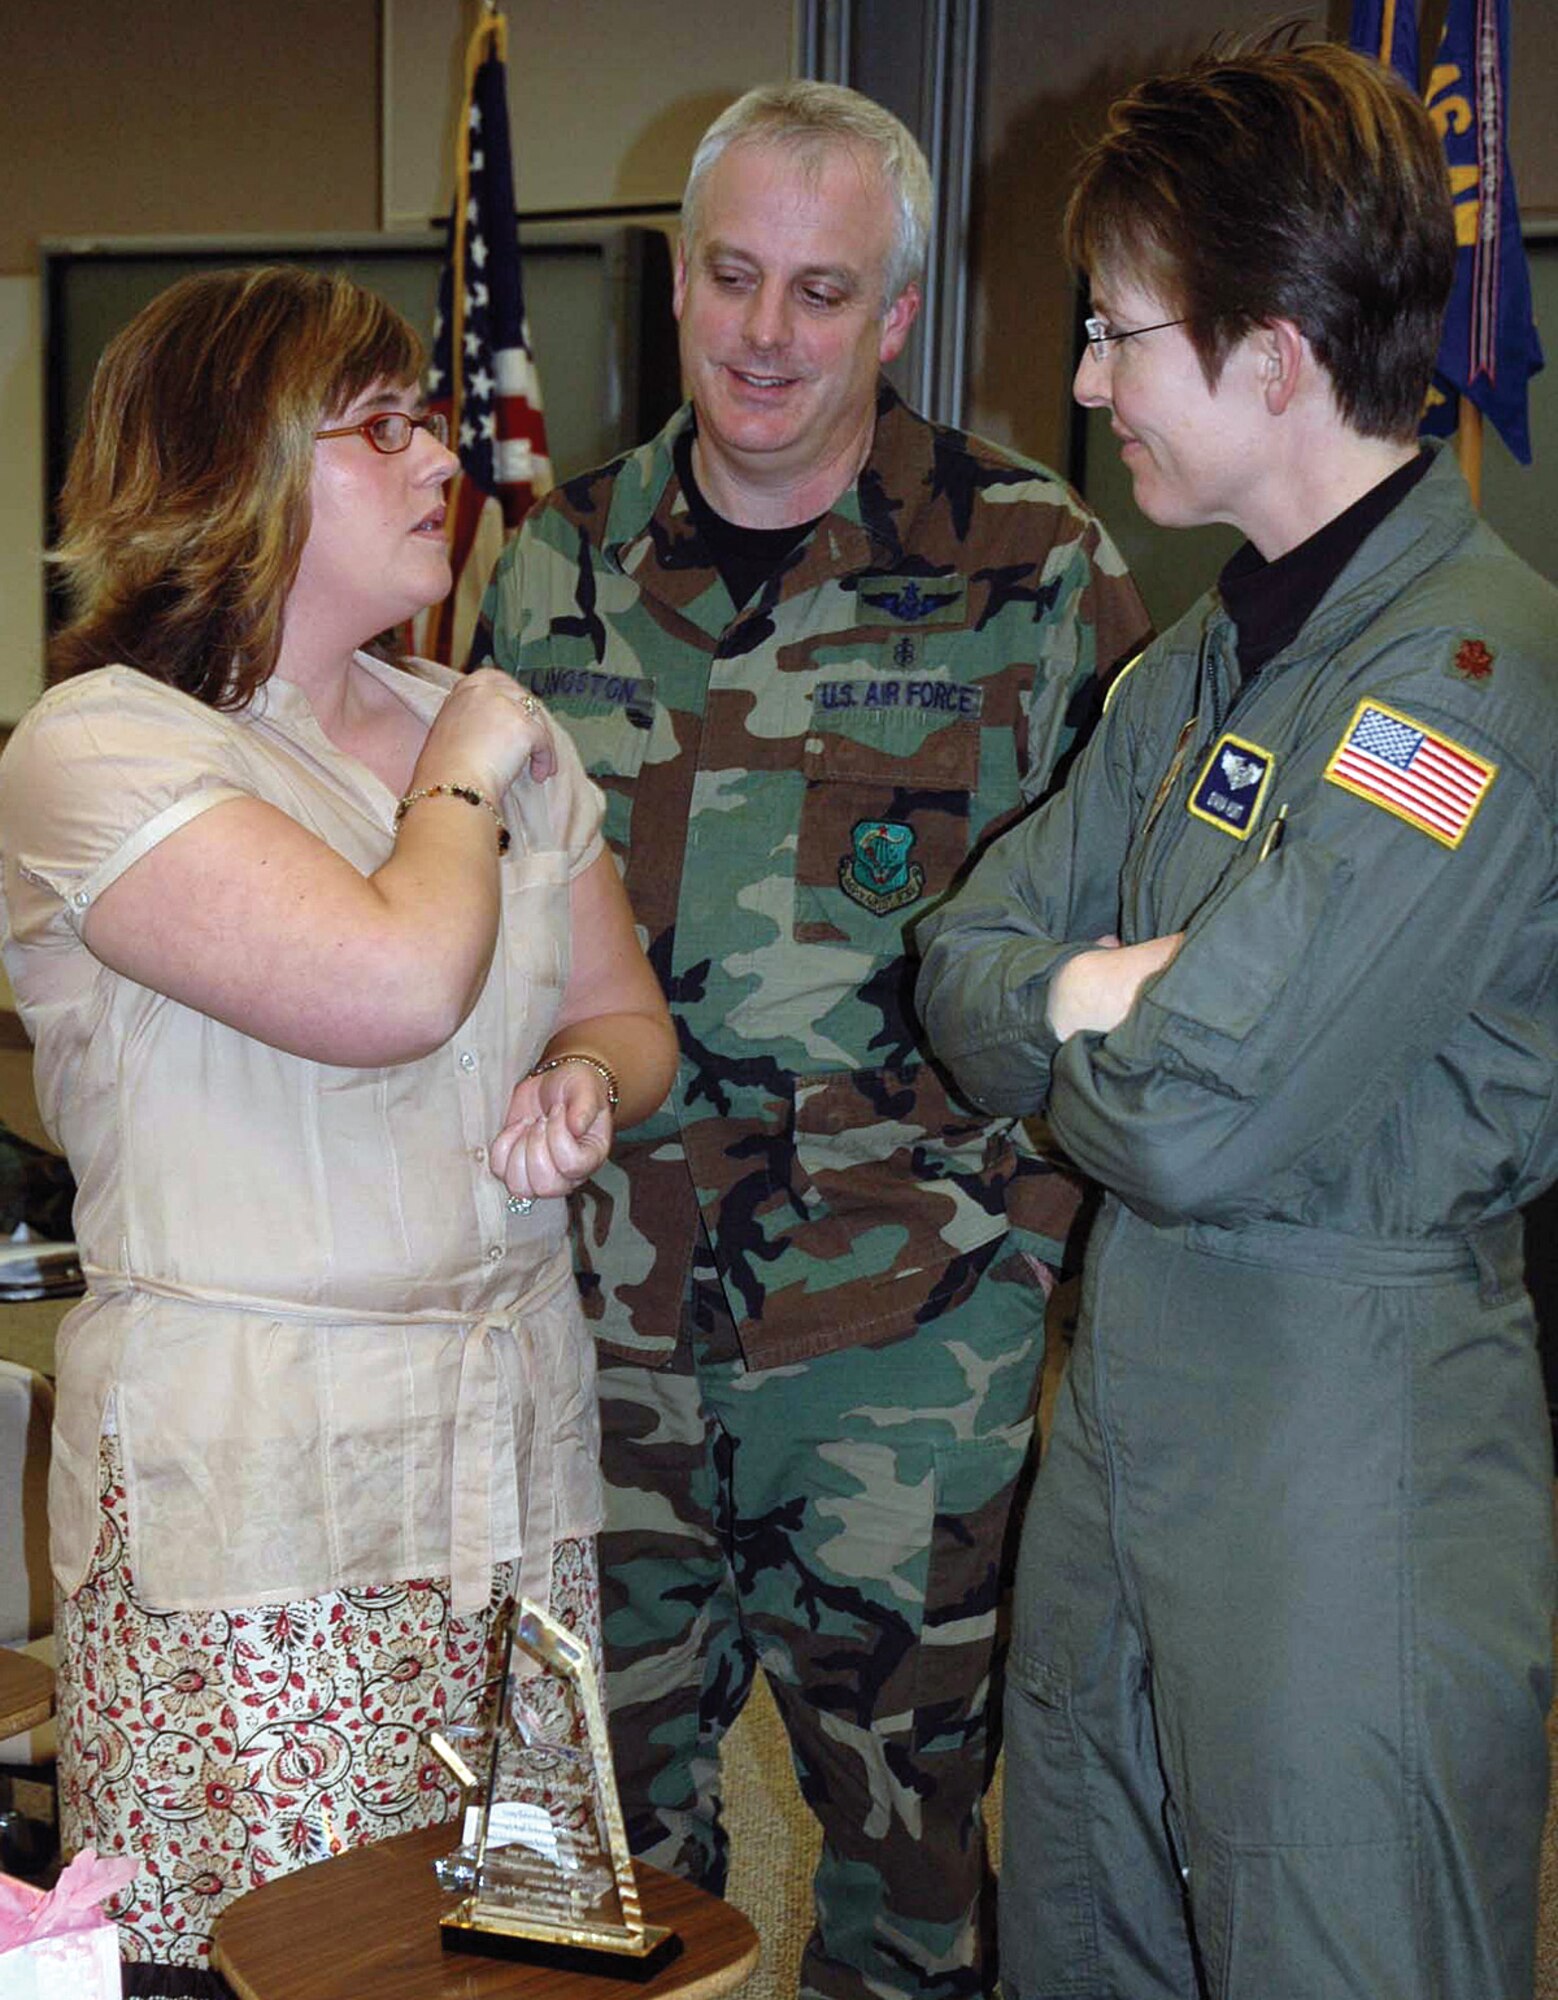 MCCHORD AIR FORCE BASE, Wash. - Stephany Langston, left, is congratulated by her husband Tech. Sgt. Clay Langston and a fellow 446th Aeromedical Staging Squadron Airman, on her key spouse award. (U.S. Air Force photo by Staff Sgt. Paul Haley)